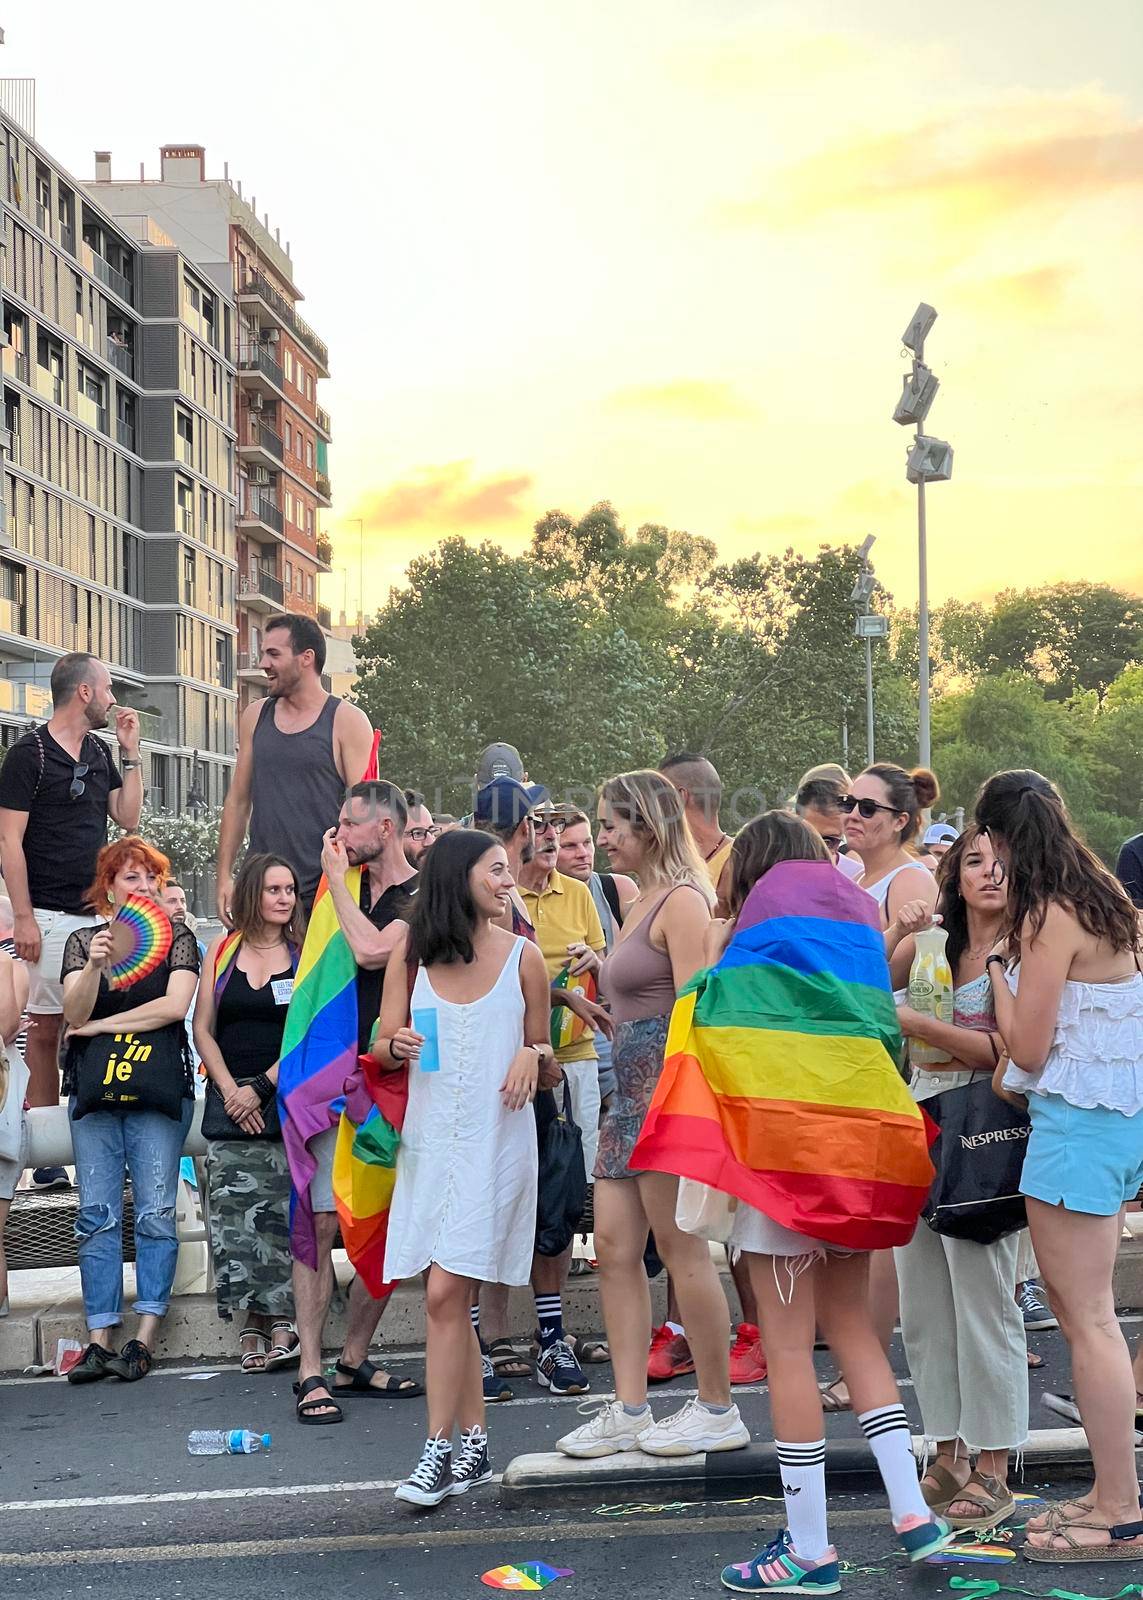 Valencia, Spain 25 June 2022: Manifest of a attractive participants of the World Pride festival in Valencia 2022. Parade of a International People celebrates the LGBT Gay Pride Parade